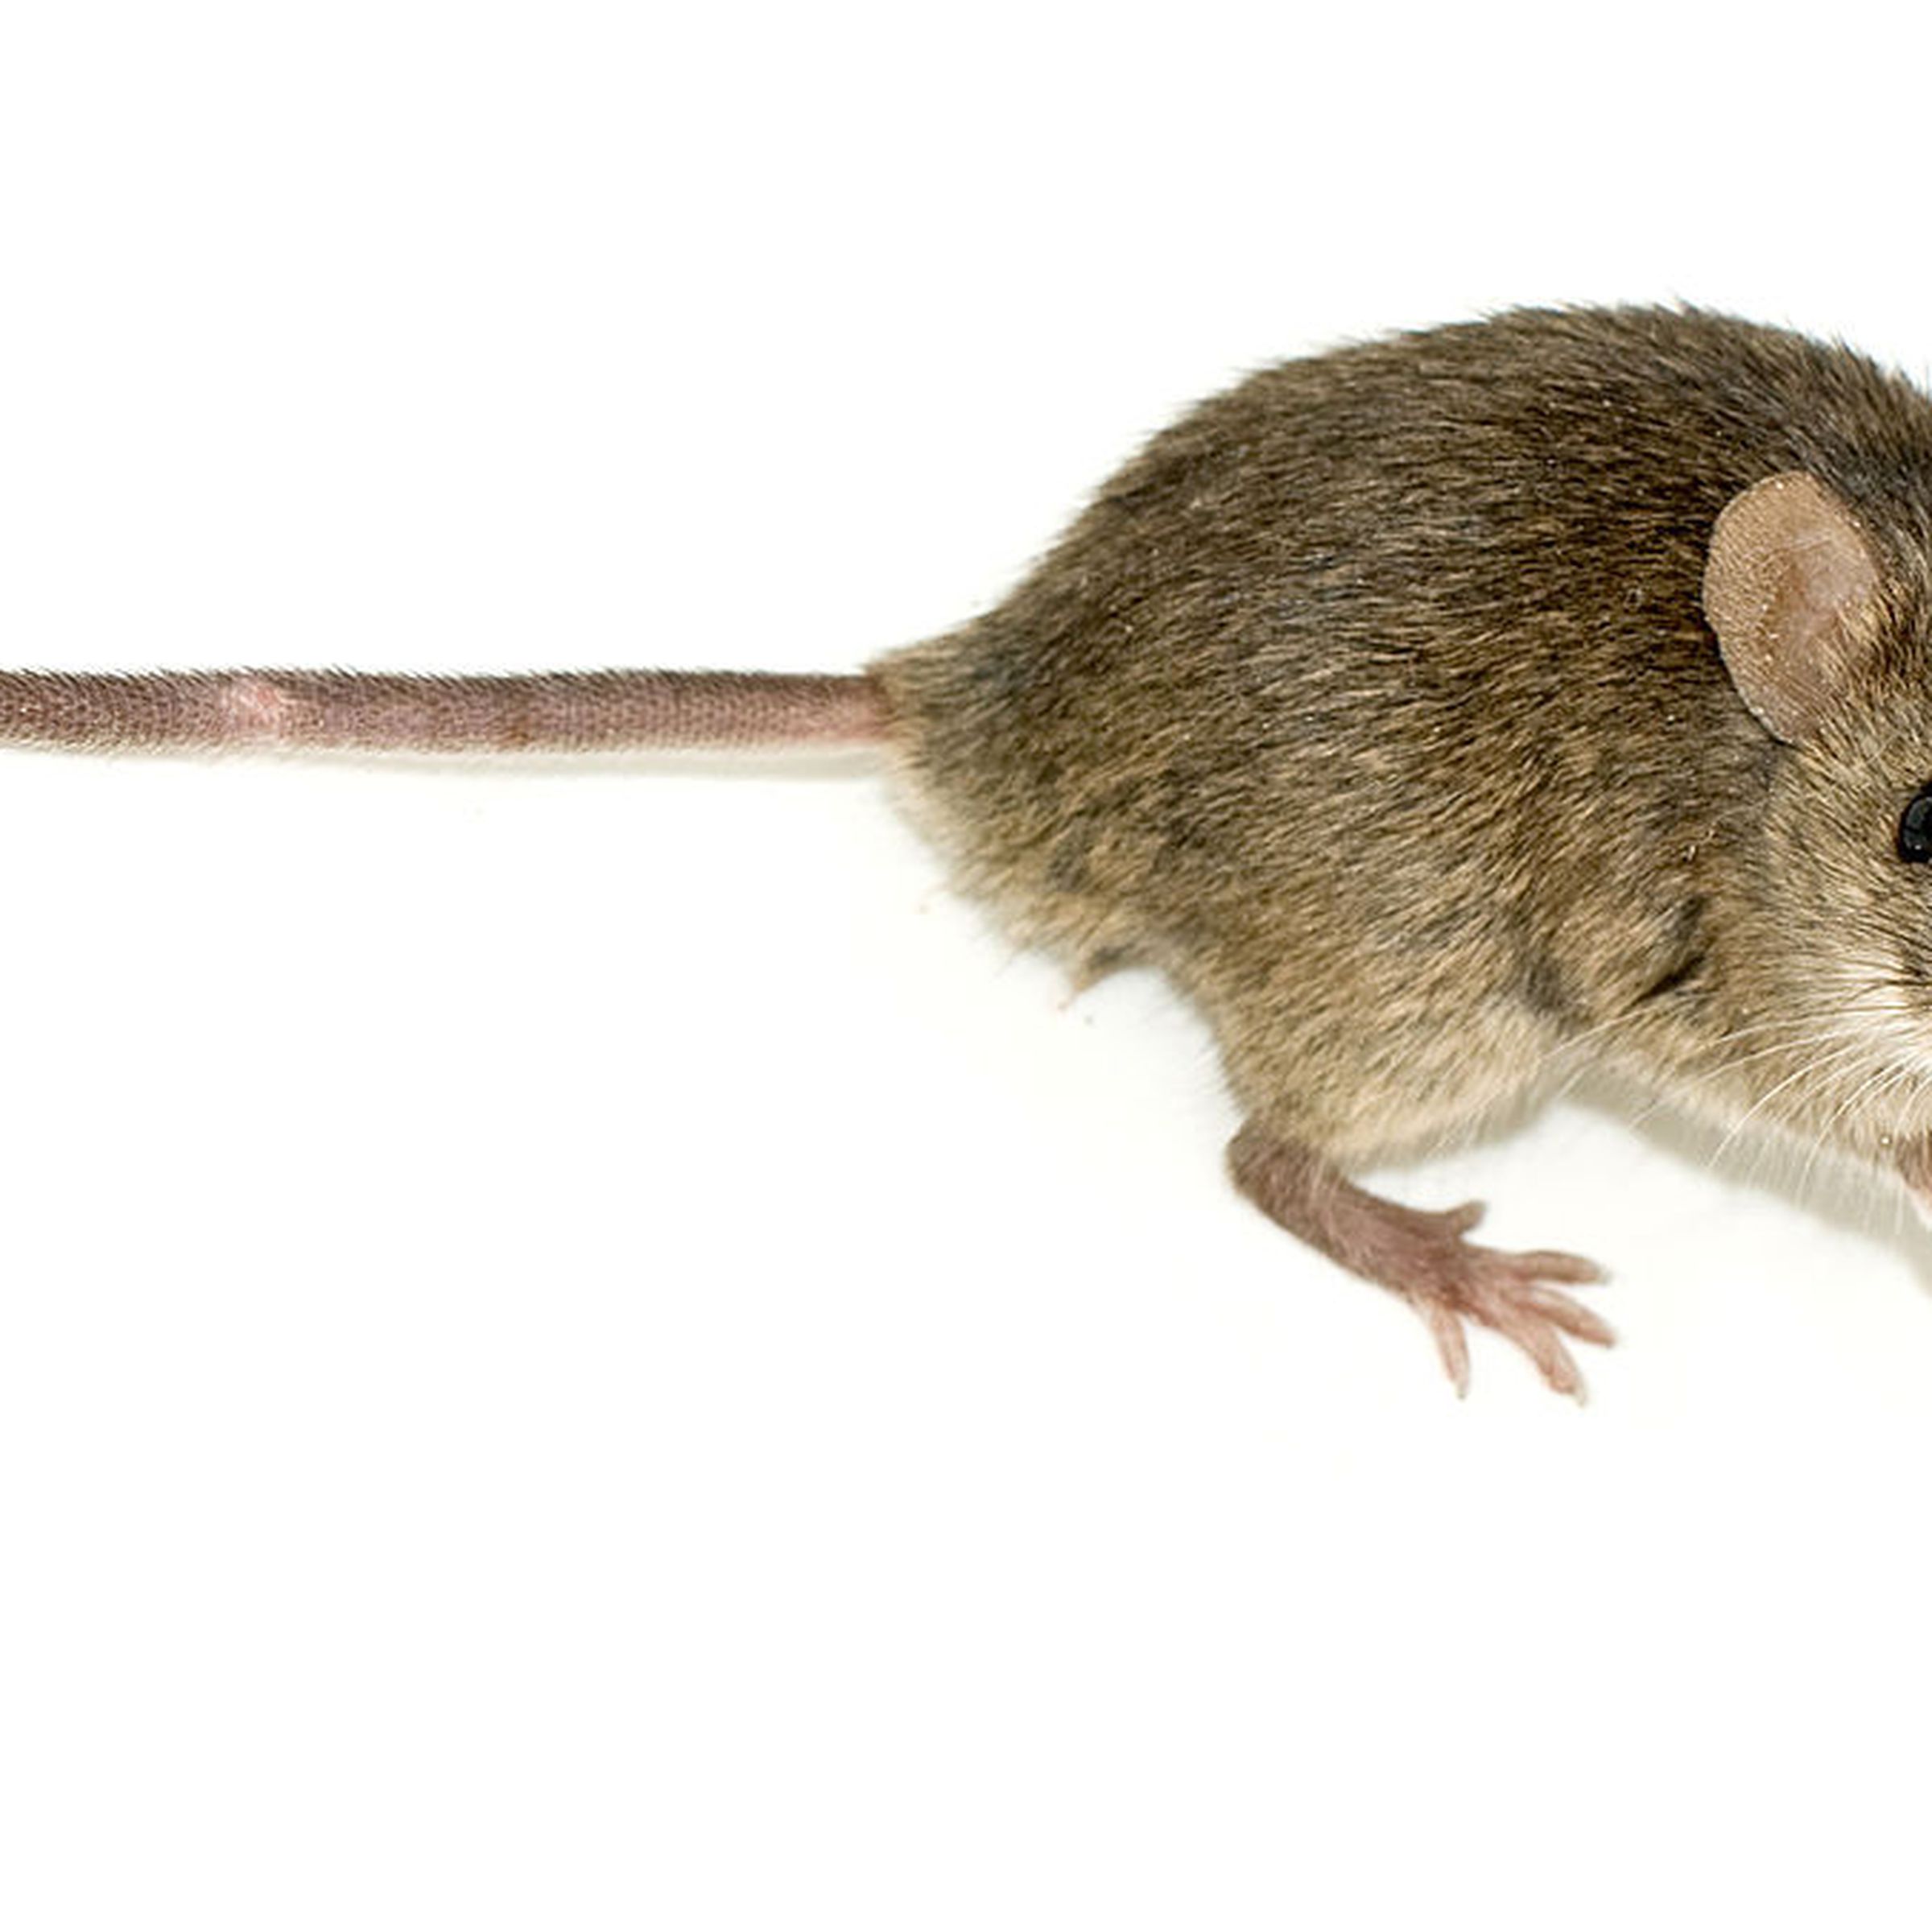 lab mouse — George Shuklin/ Wikimedia commons